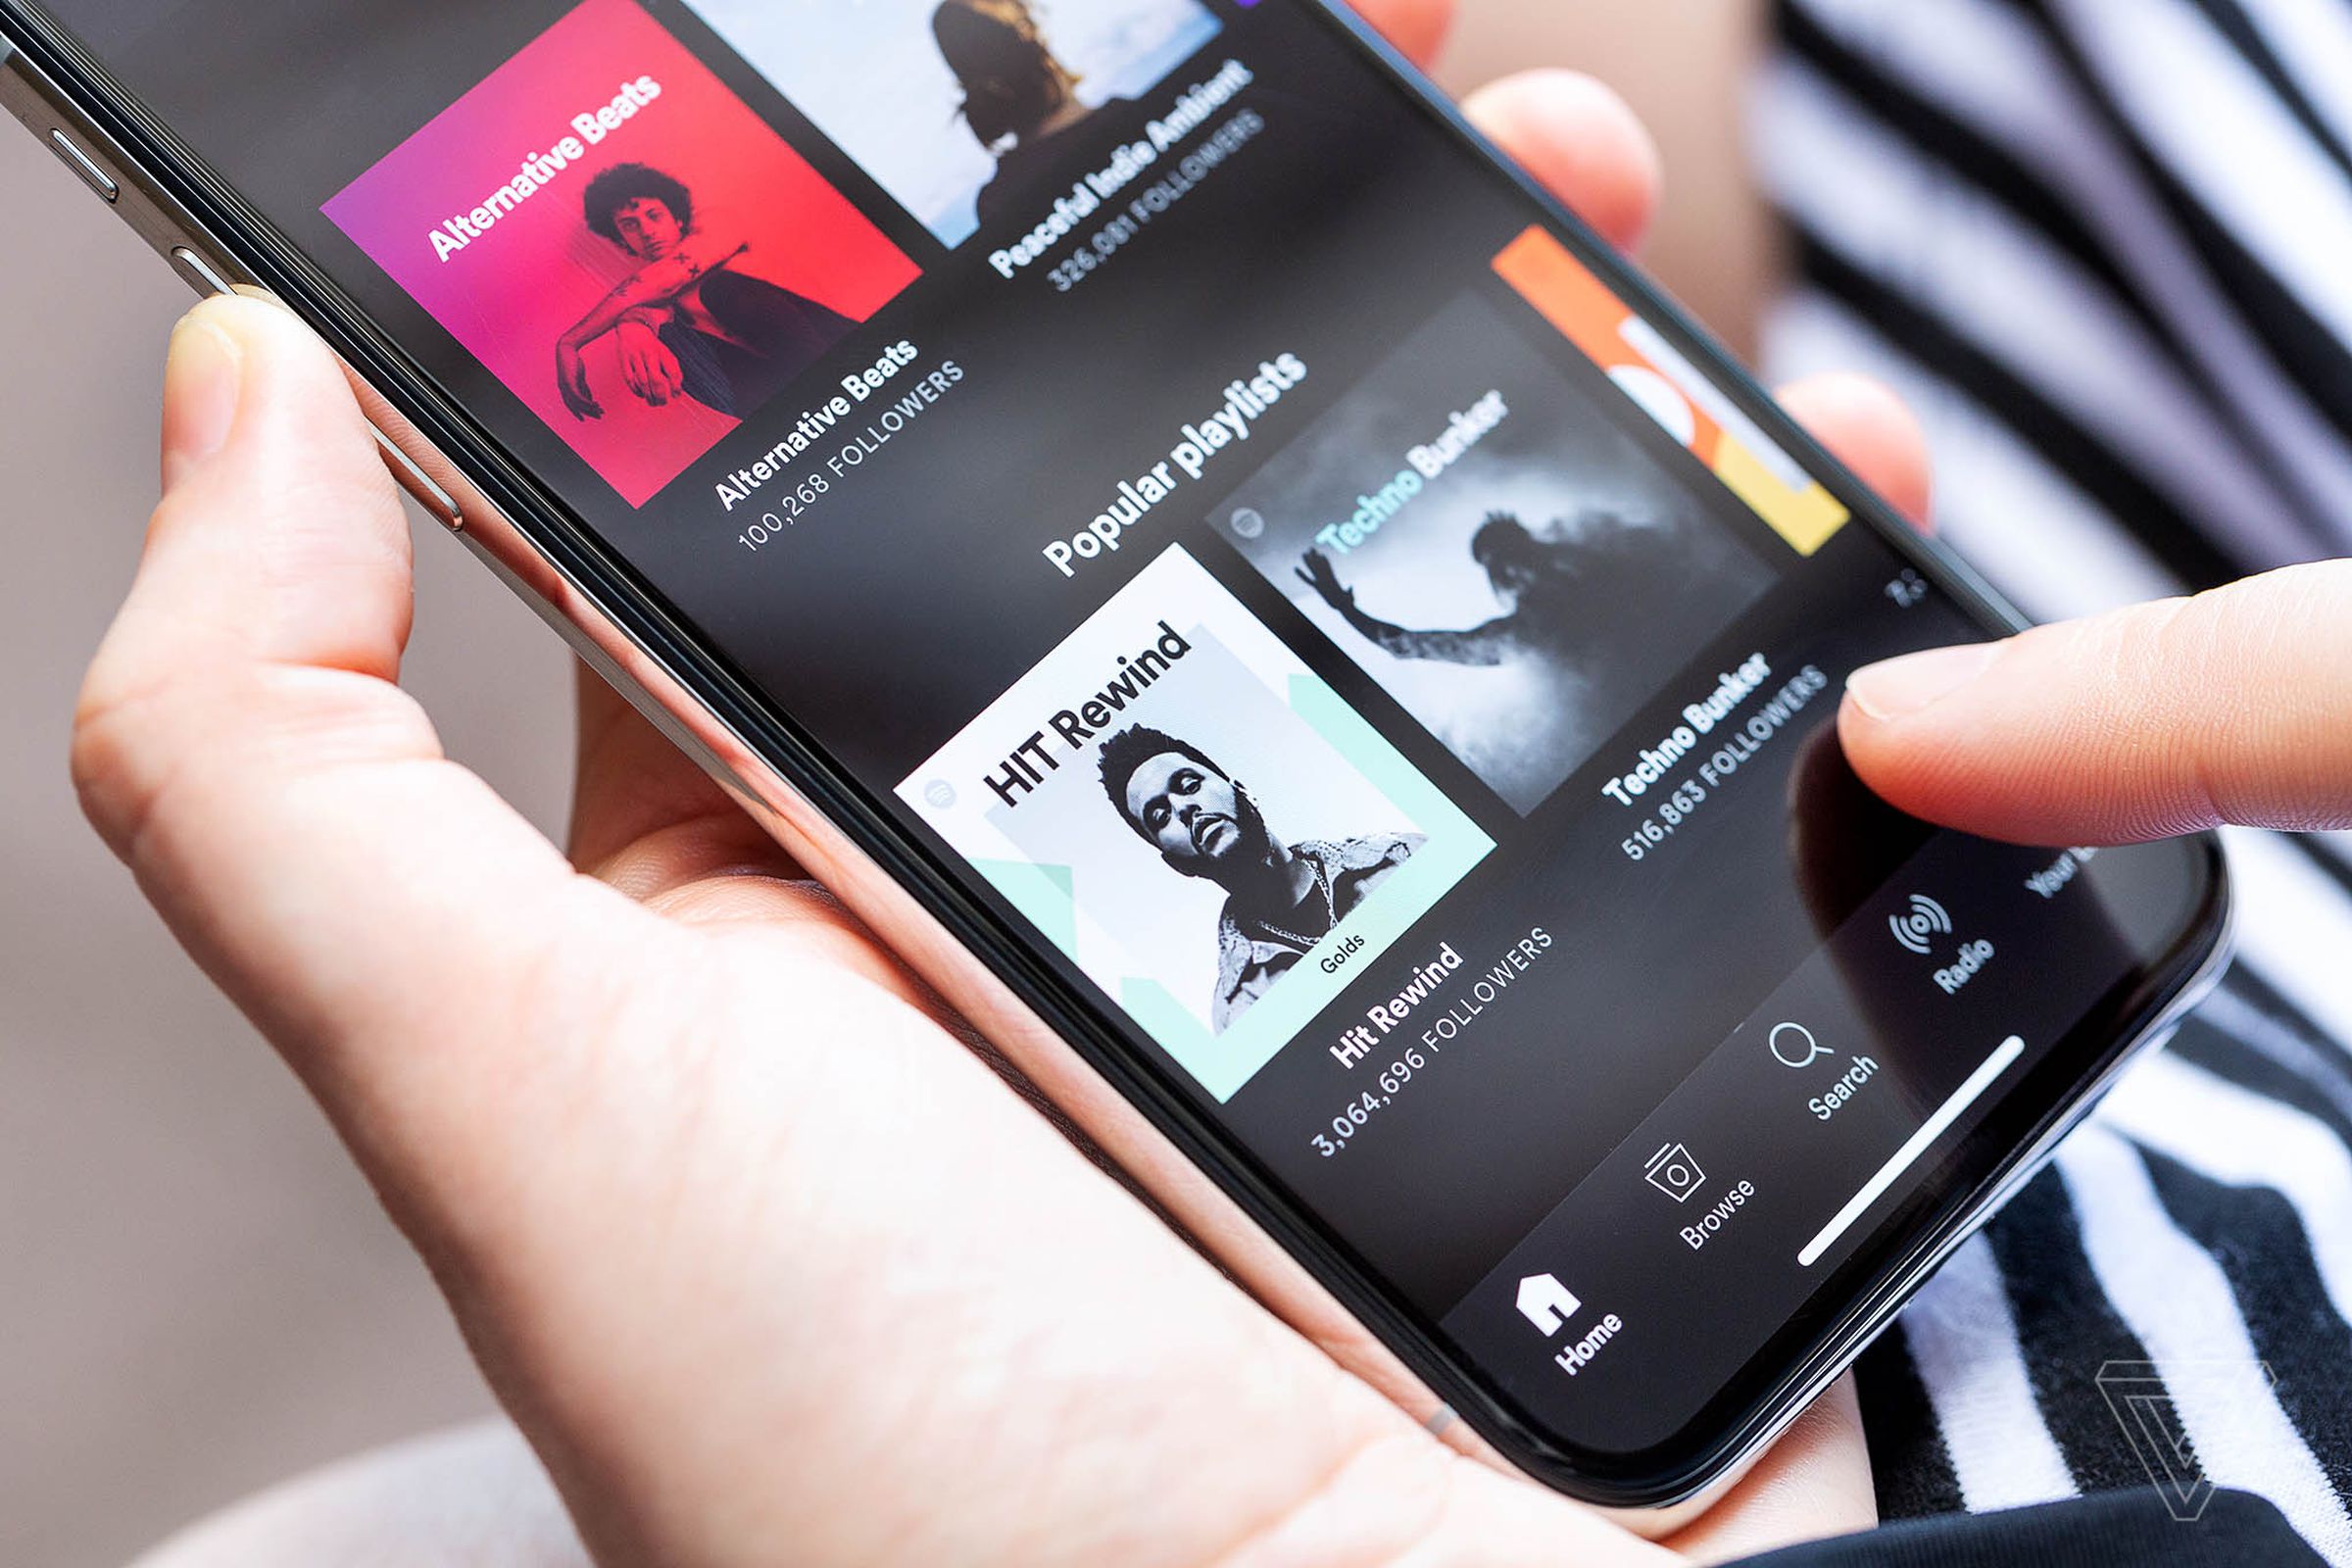 Consider a Spotify gift card to the music lover in your life